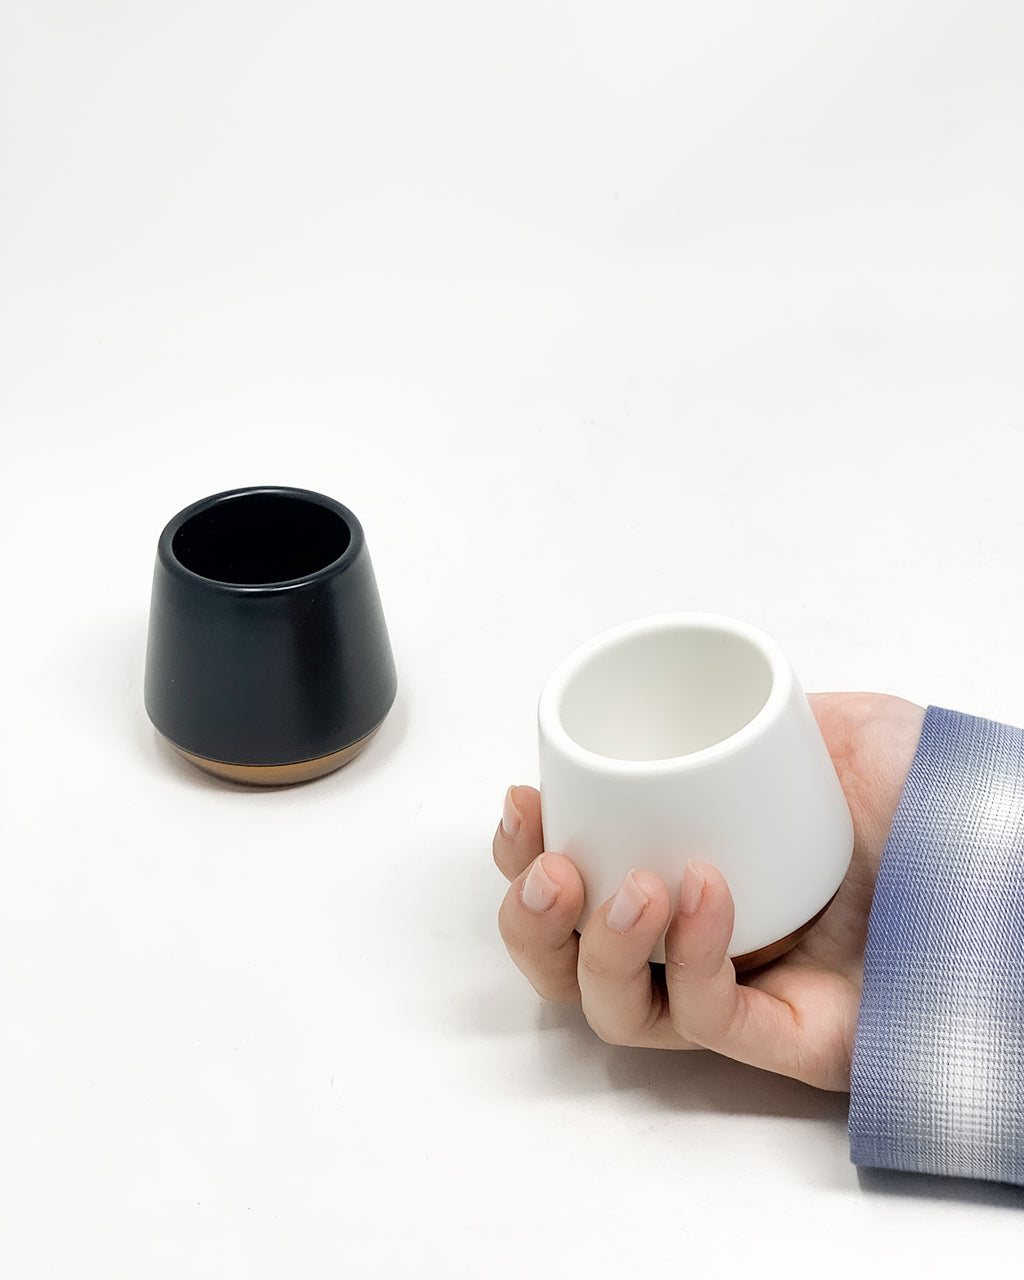 Fellow Joey Double Wall Espresso Mugs: A Must-Have for Coffee Lovers –  BrandsWalk